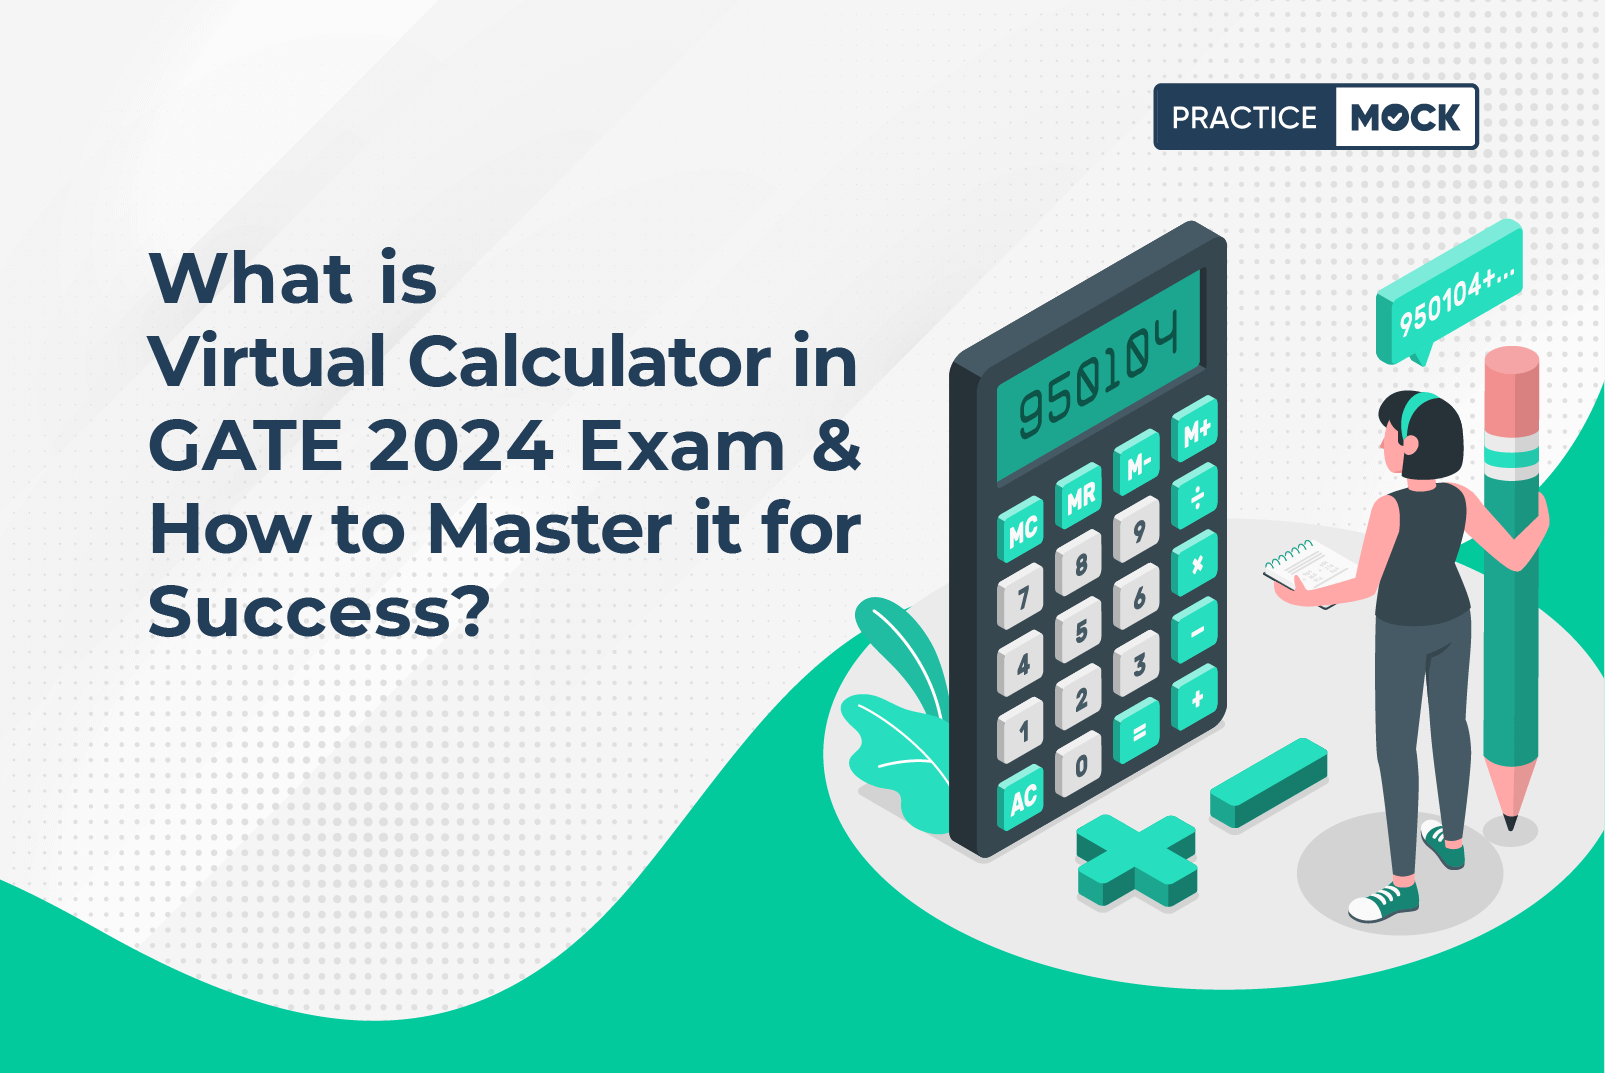 How to Use a Virtual Calculator in GATE 2024 Exam: Mastering the Tool for Success